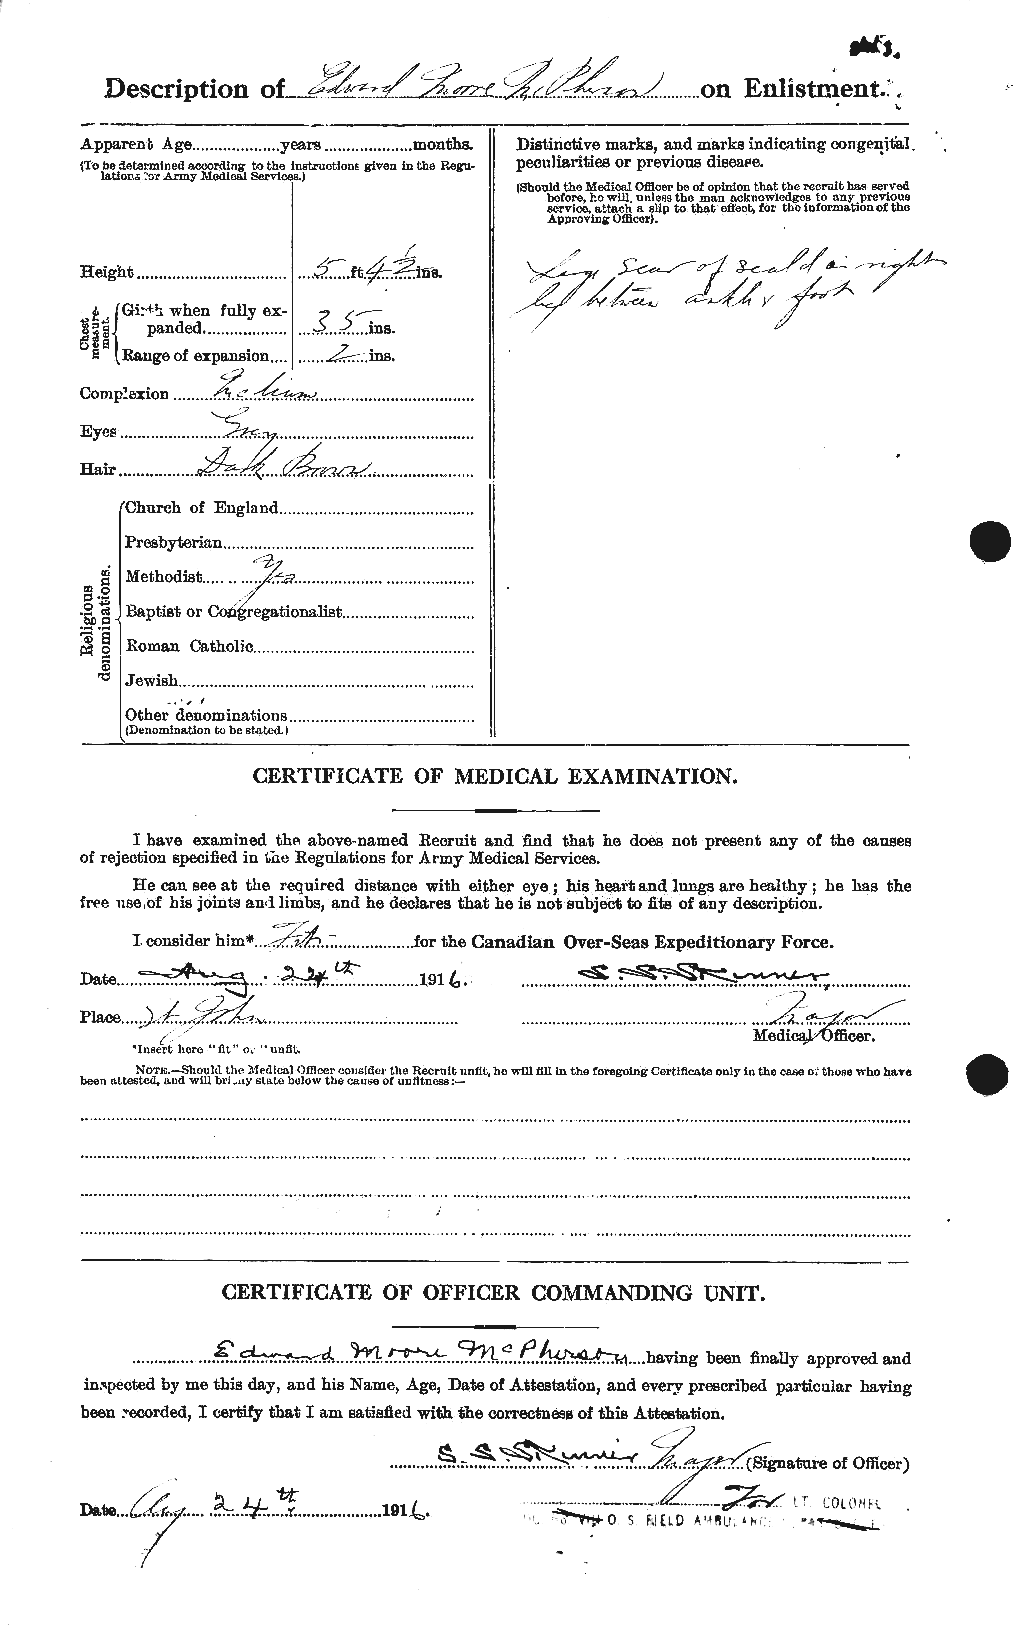 Personnel Records of the First World War - CEF 541520b